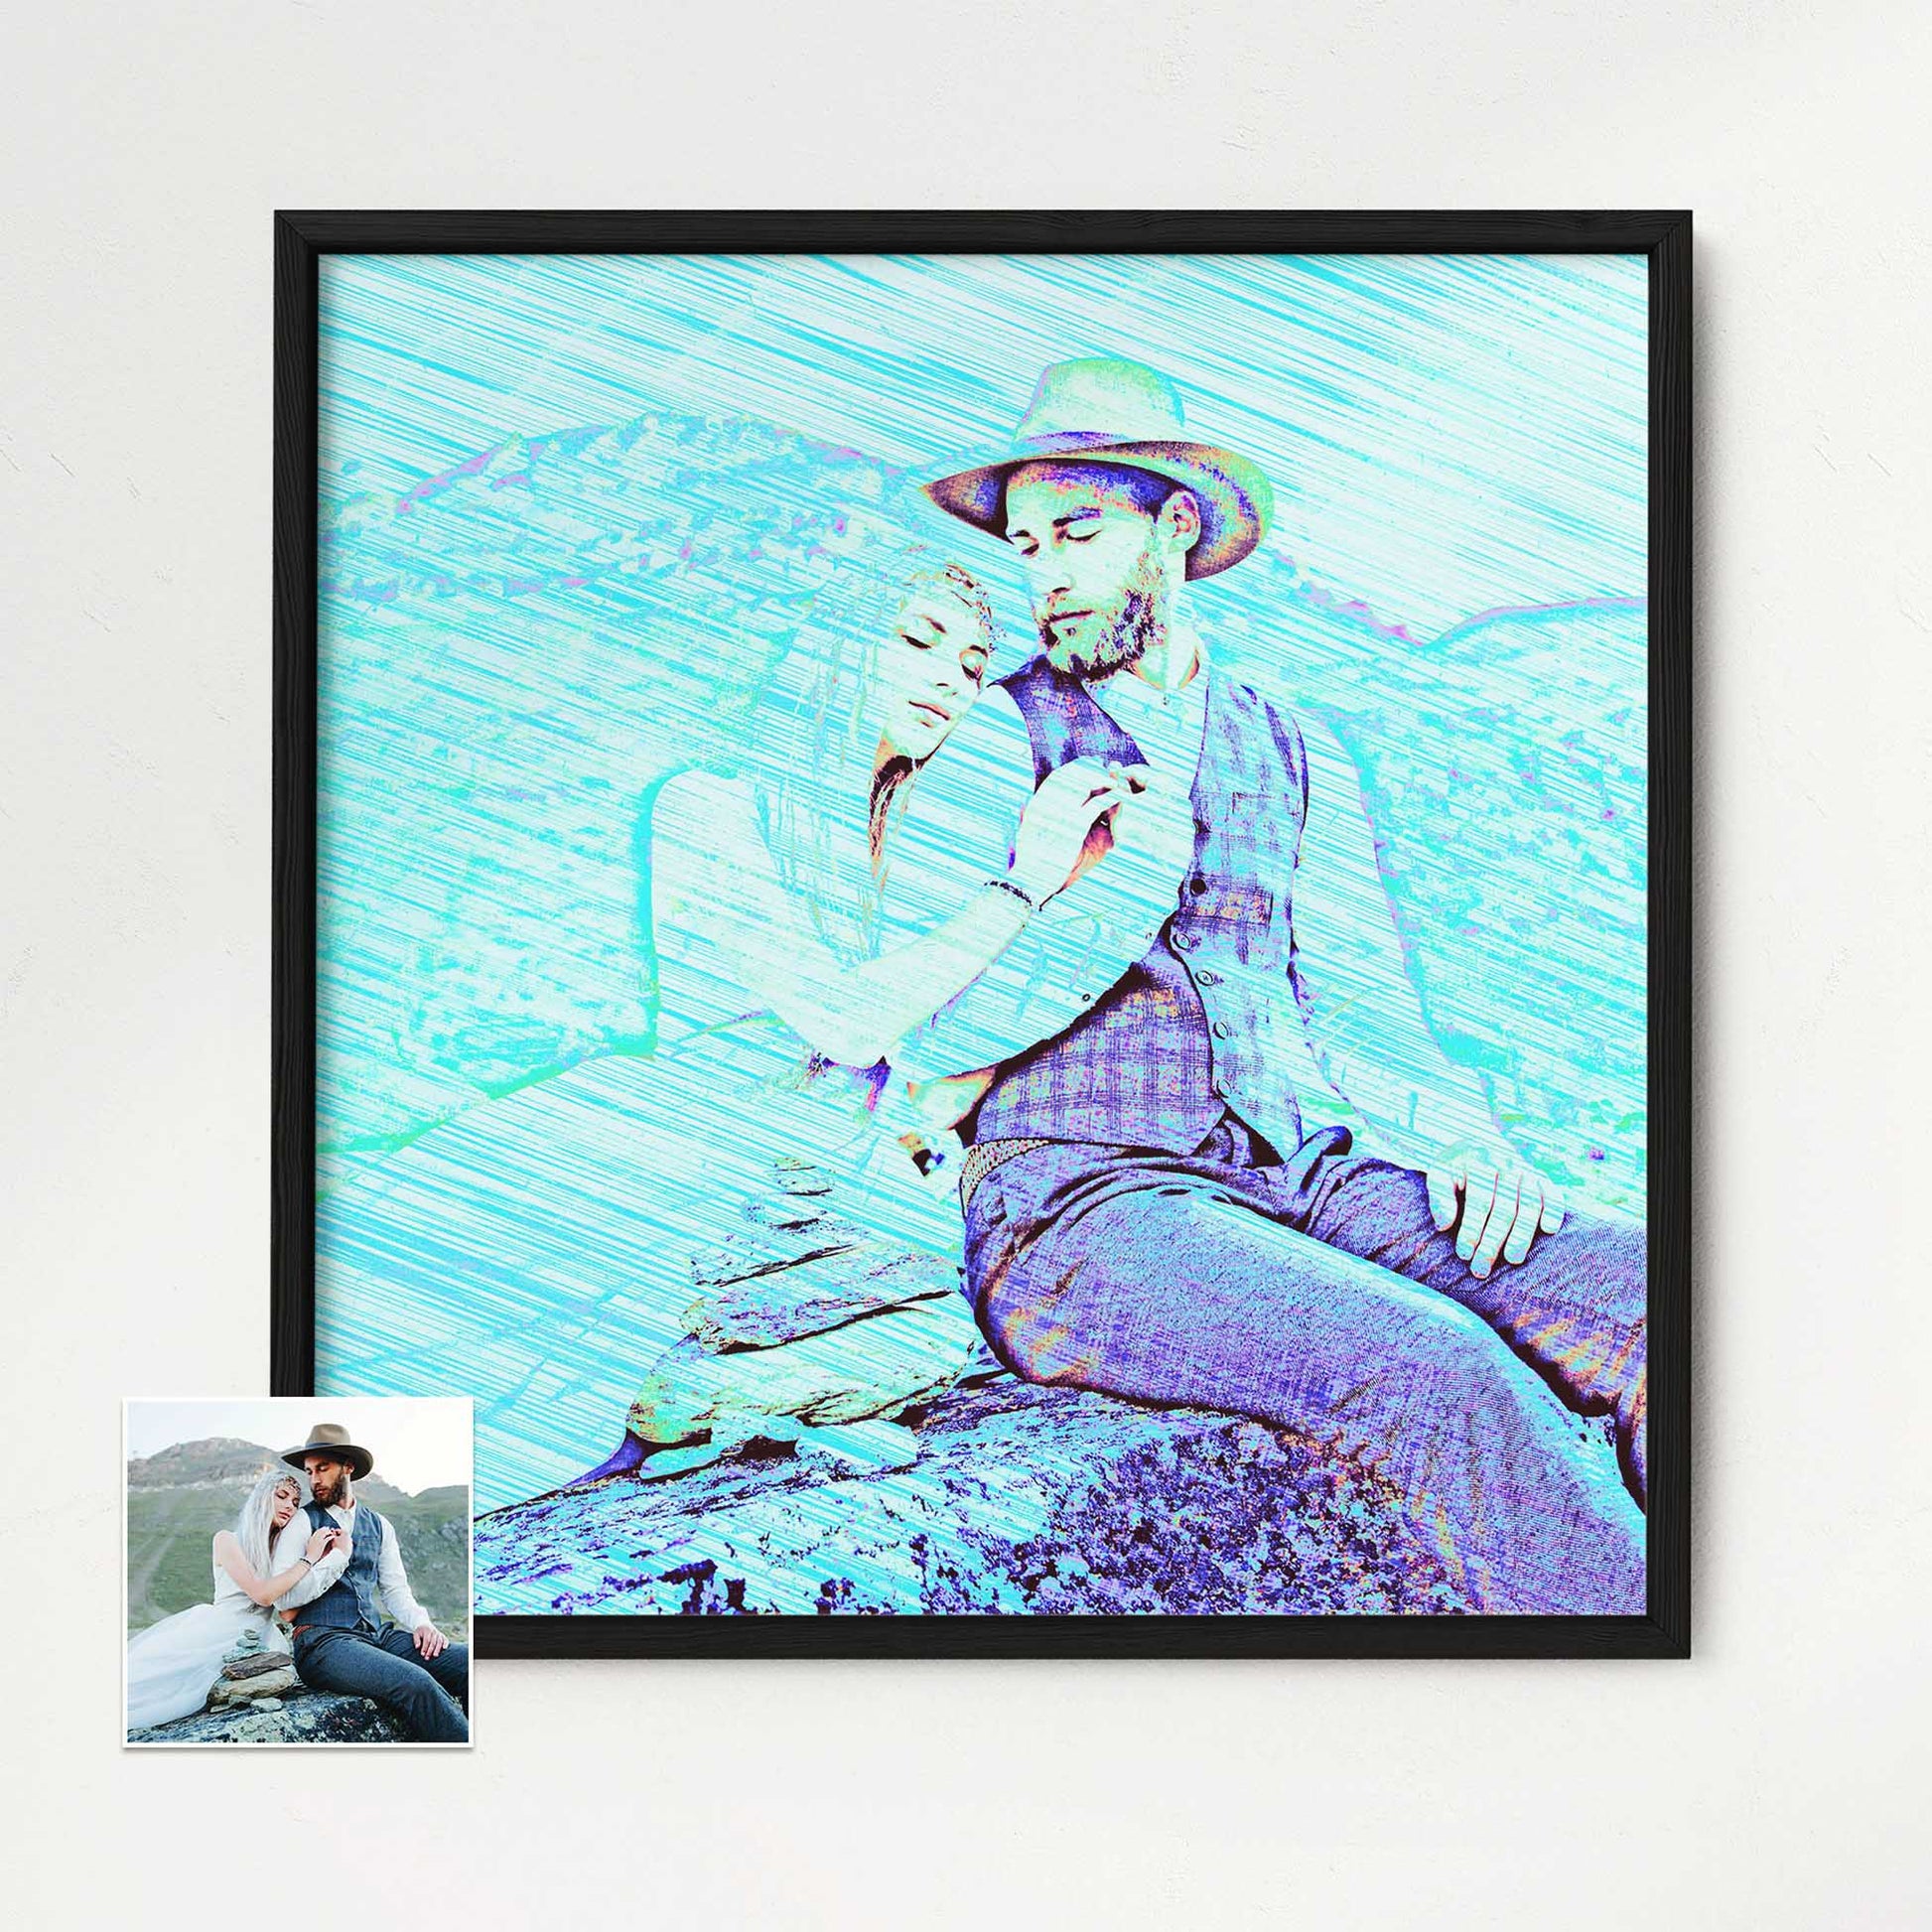 Personalised Blue Drawing Framed Print: Elevate your home or office decor with this cool and quirky piece. The pencil effect adds a touch of creativity and originality, making it a standout artwork. Whether as a gift or for your decor